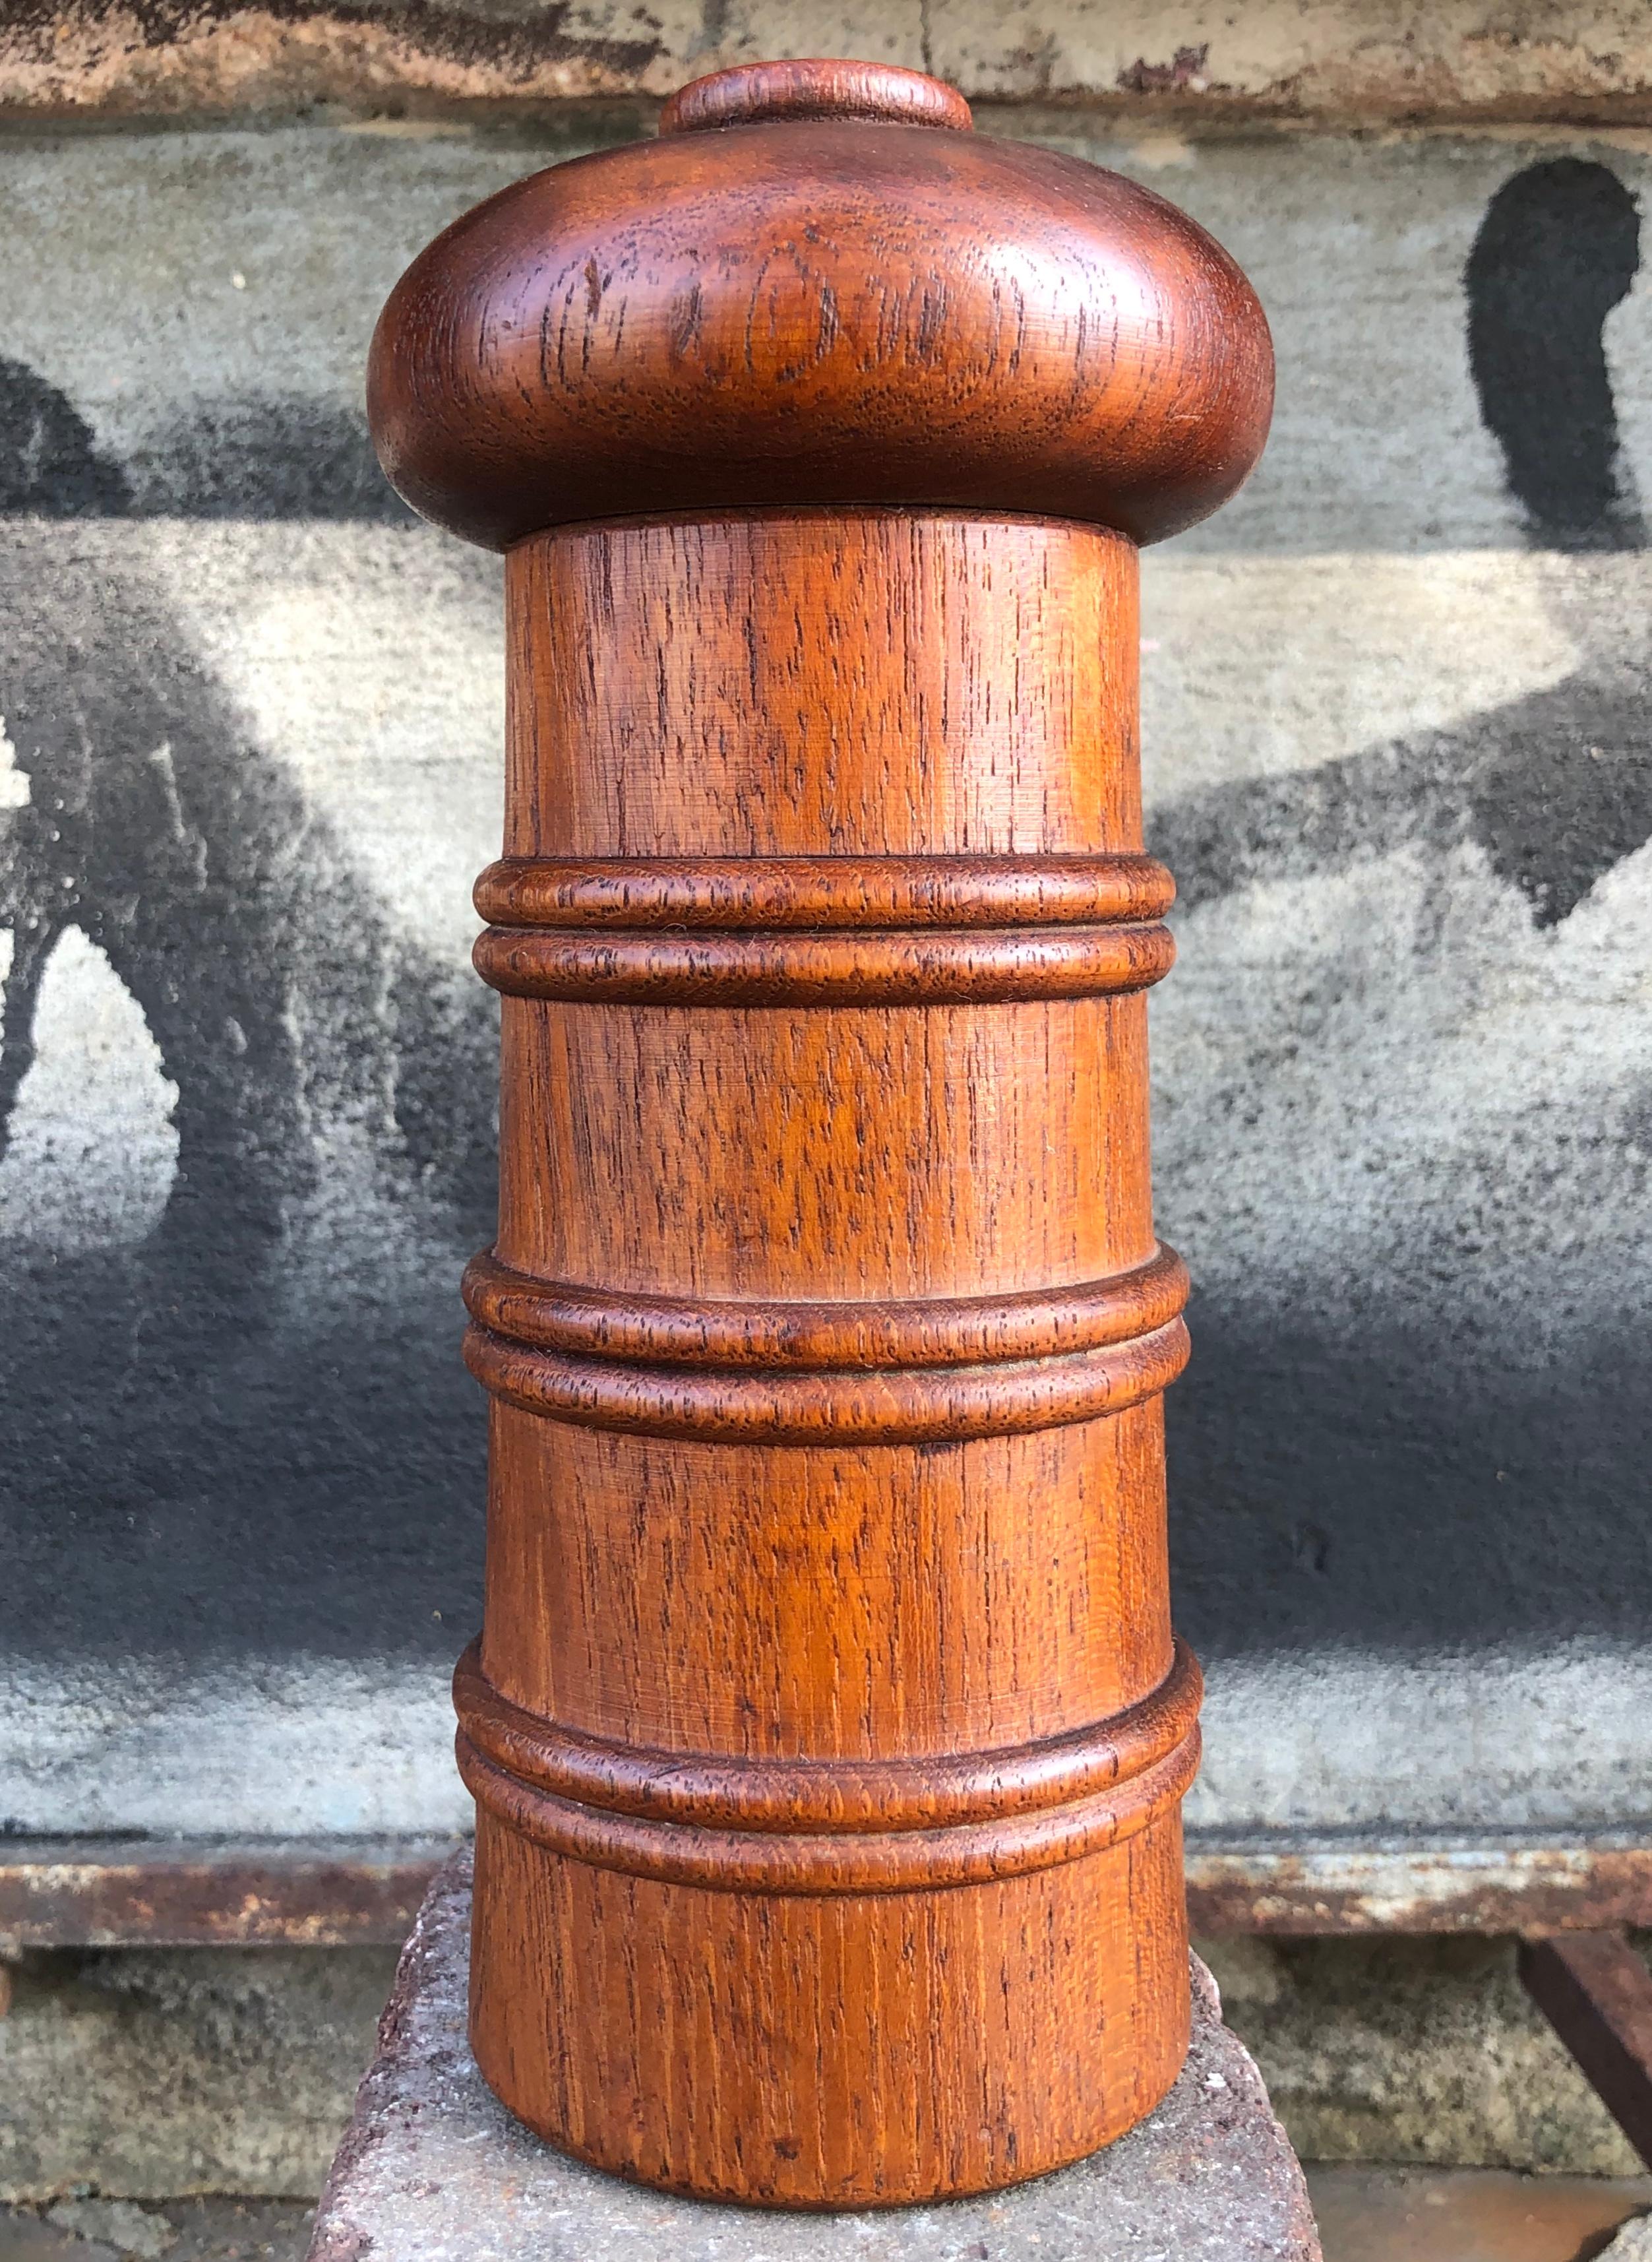 Gorgeous early teak pepper tinder/mill designed by Jens Quistgaard and produced by Dansk of Denmark. Signed to underside. The gorgeous teak has been freshly oiled and is radiant. The patina is superb and the sculptural lines make it as pleasing to